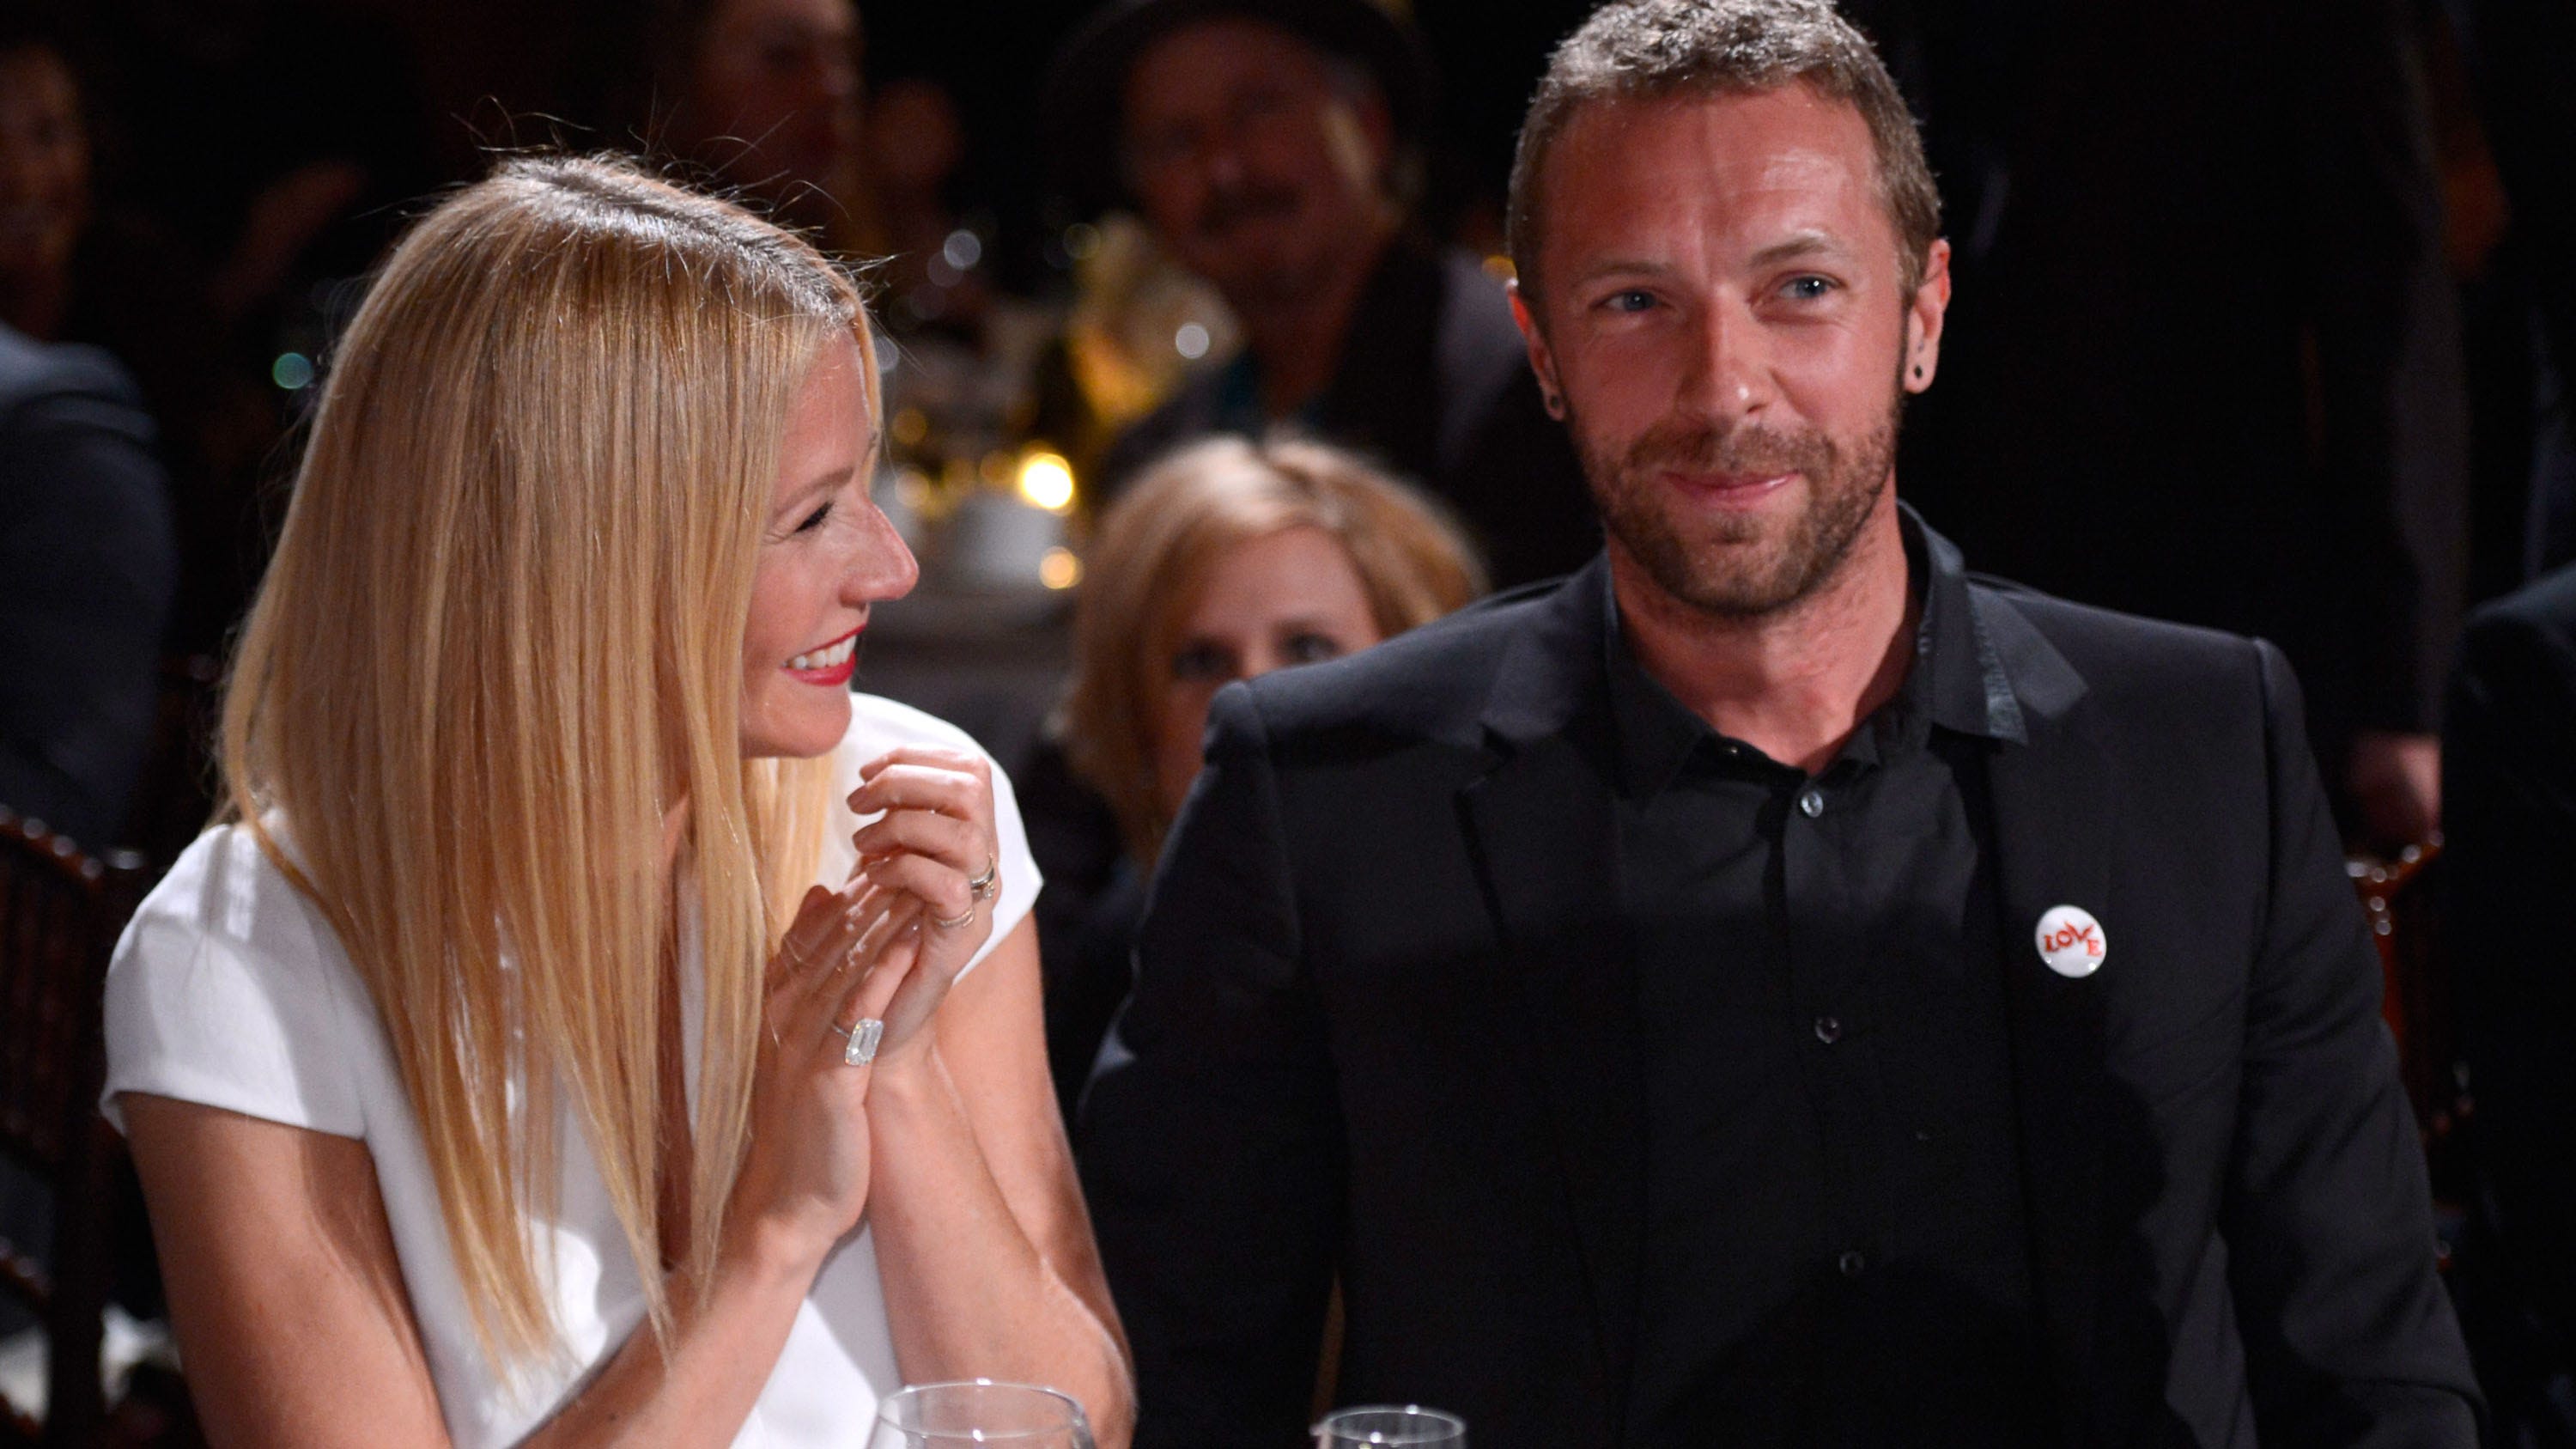 Gwyneth Paltrow reflects on Chris Martin split: ‘I never wanted to get divorced’